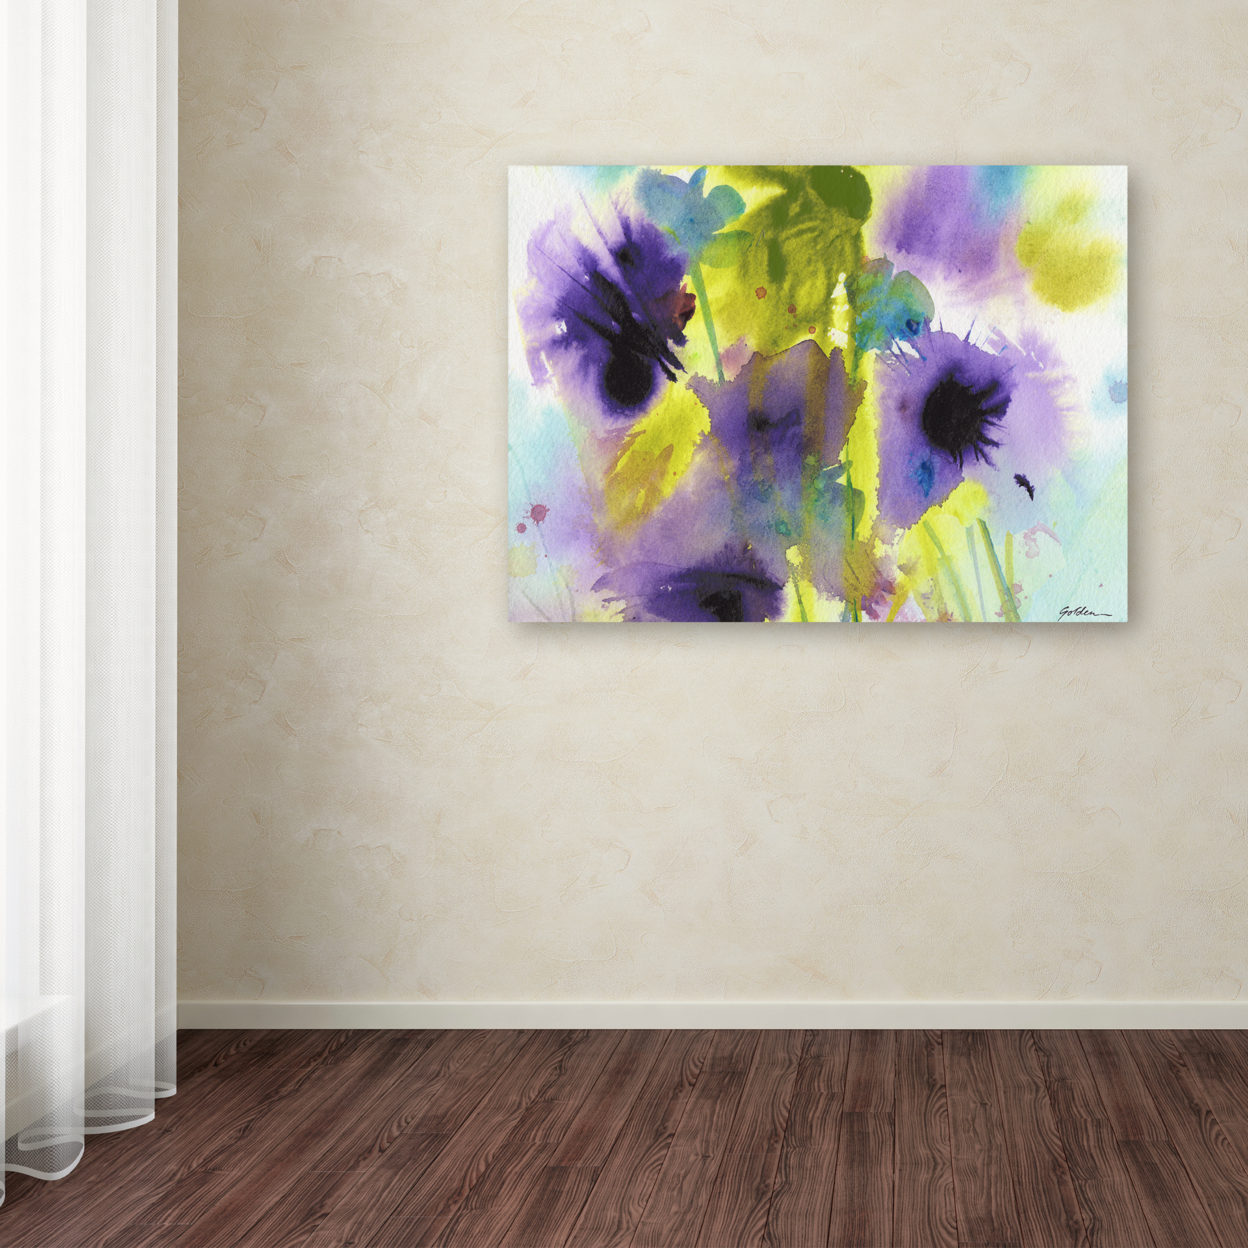 Sheila Golden 'Shades Of Violet' Canvas Wall Art 35 X 47 Inches